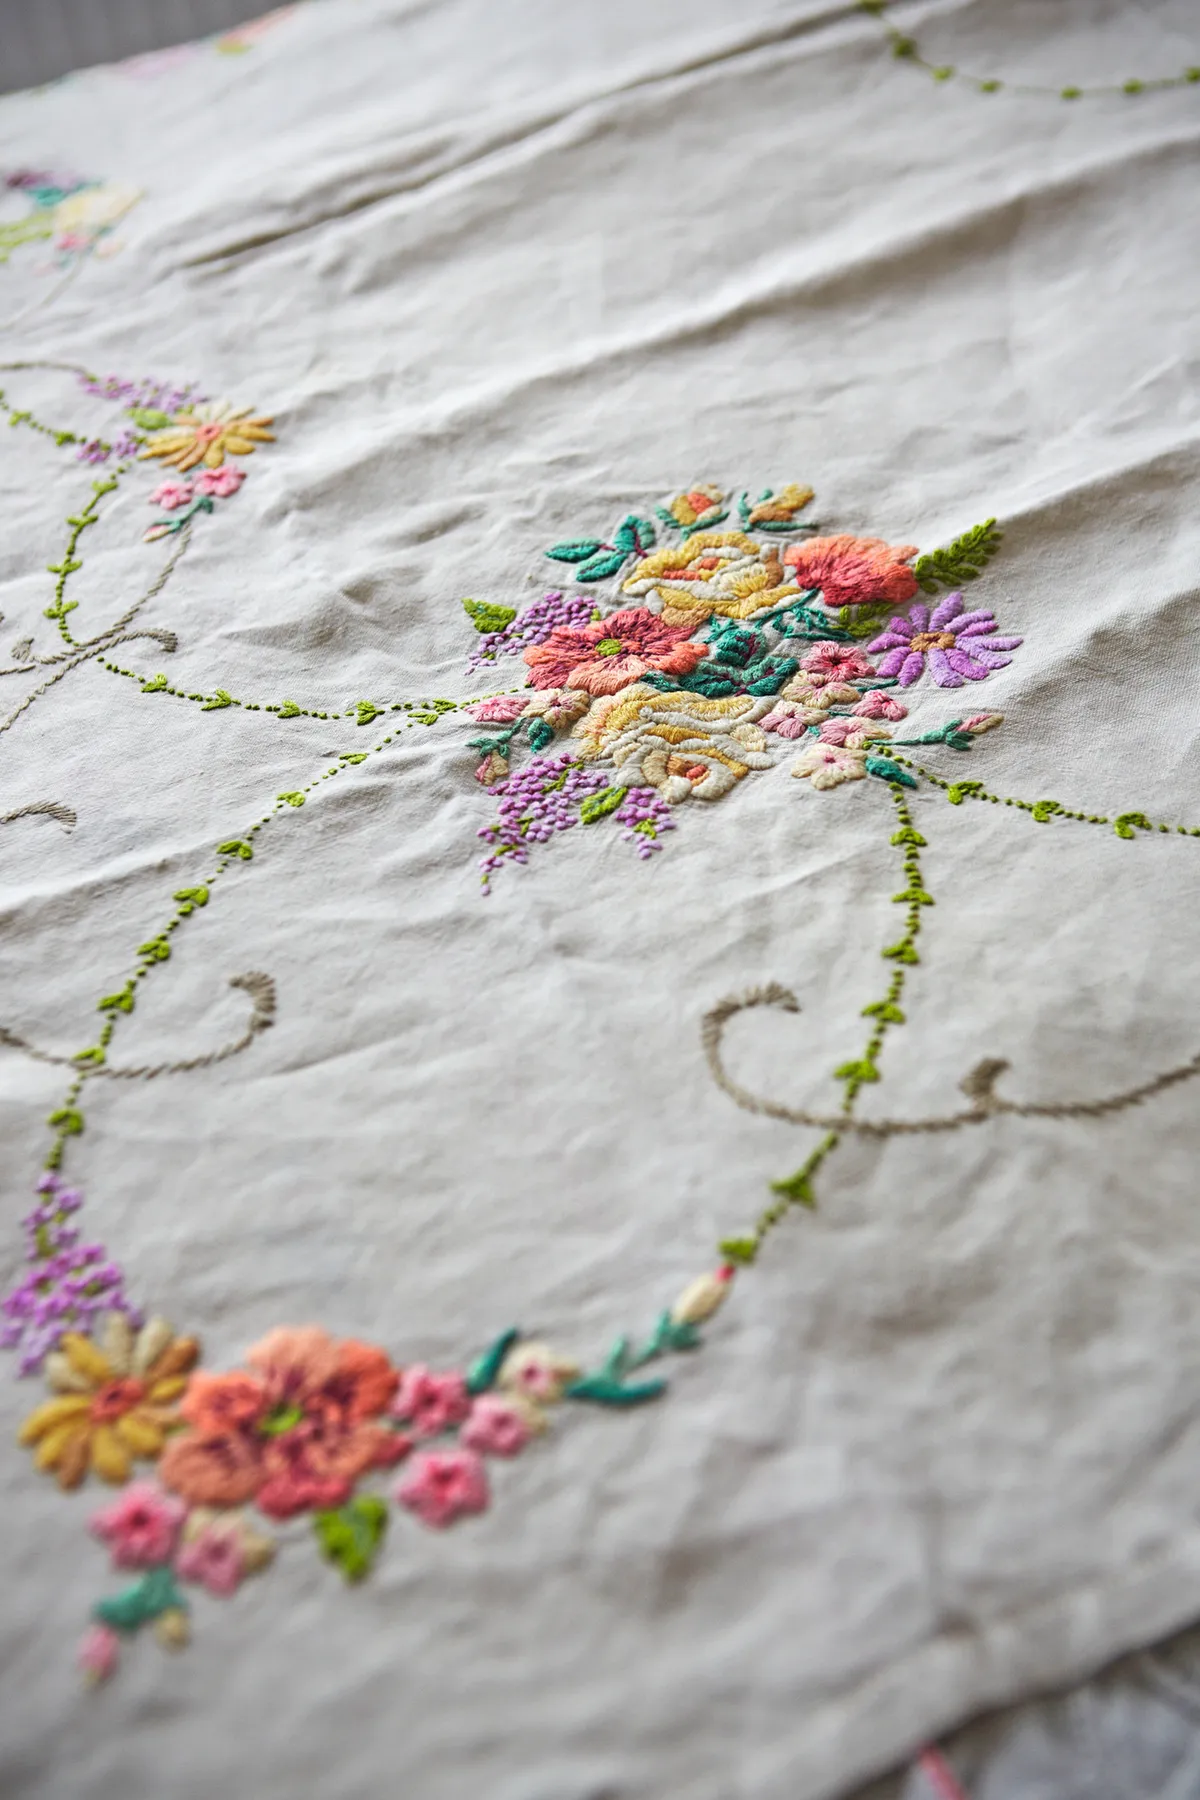 Intricate detailing on an antique tablecloth.